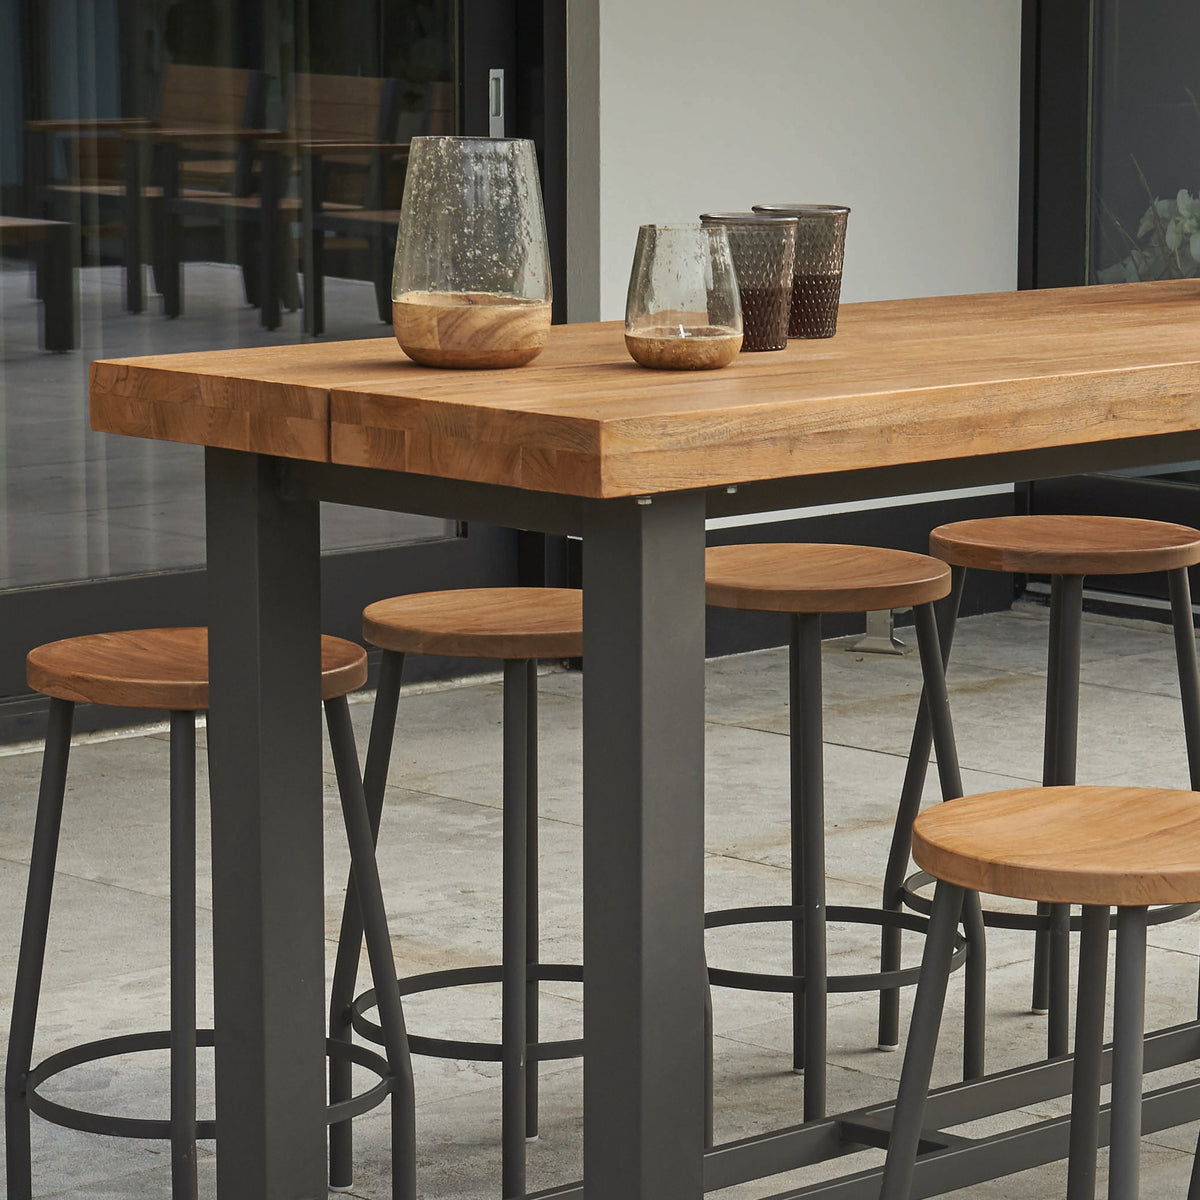 Teak accents with aluminum frame create a great modern look for your patio furniture.